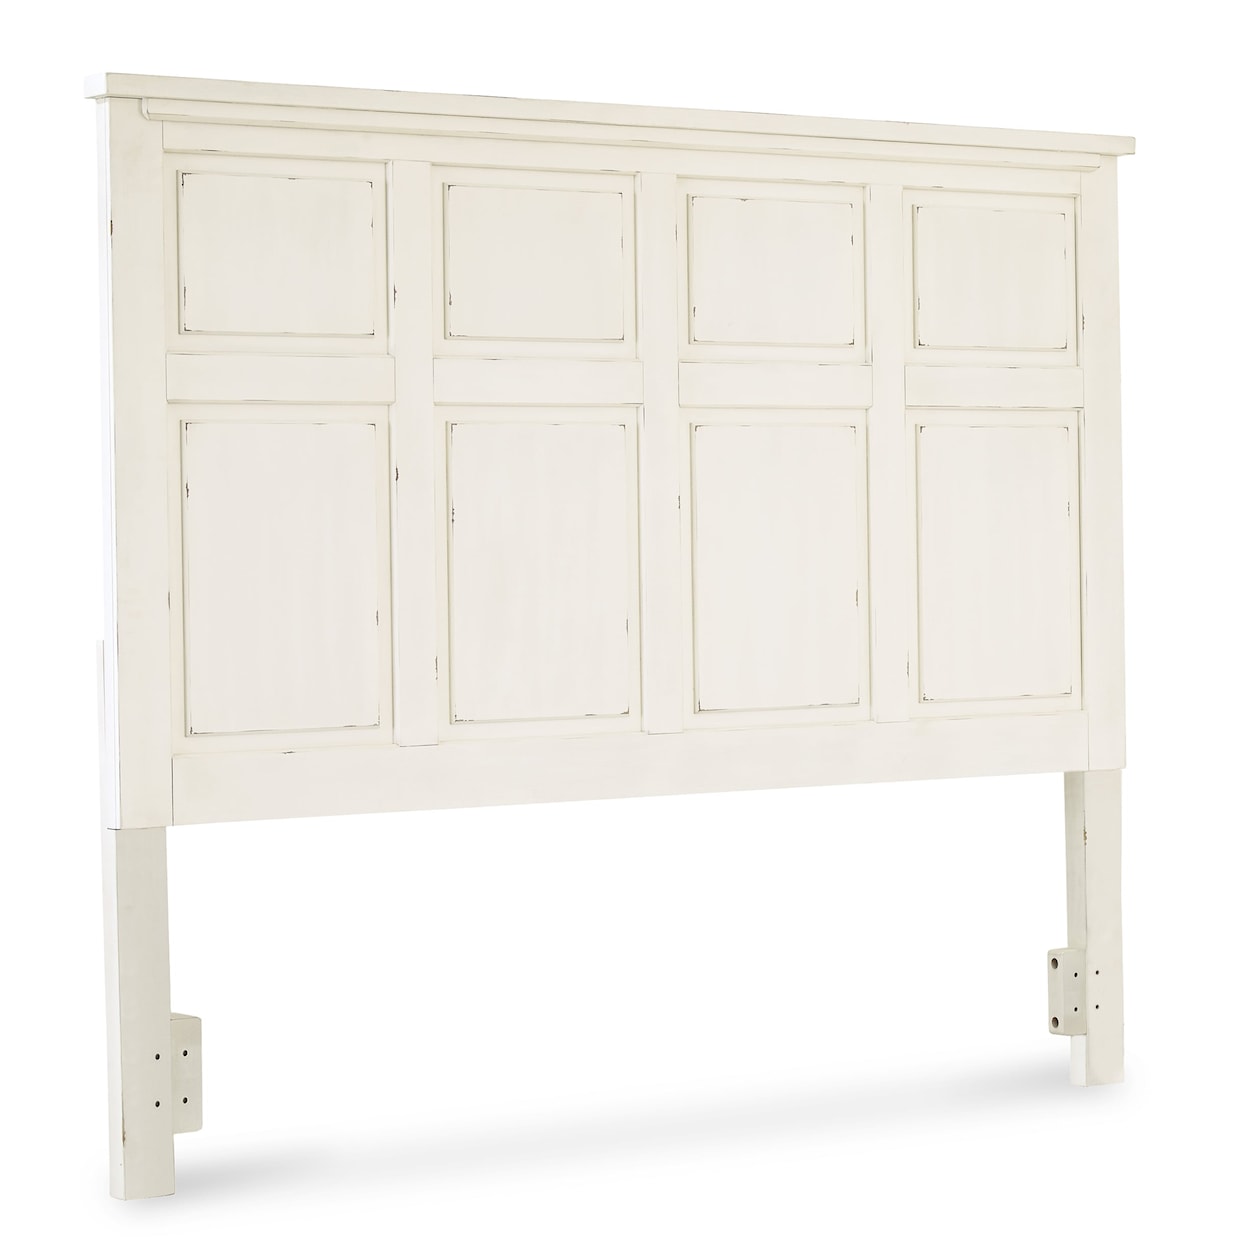 Signature Design by Ashley Braunter Queen Panel Bed